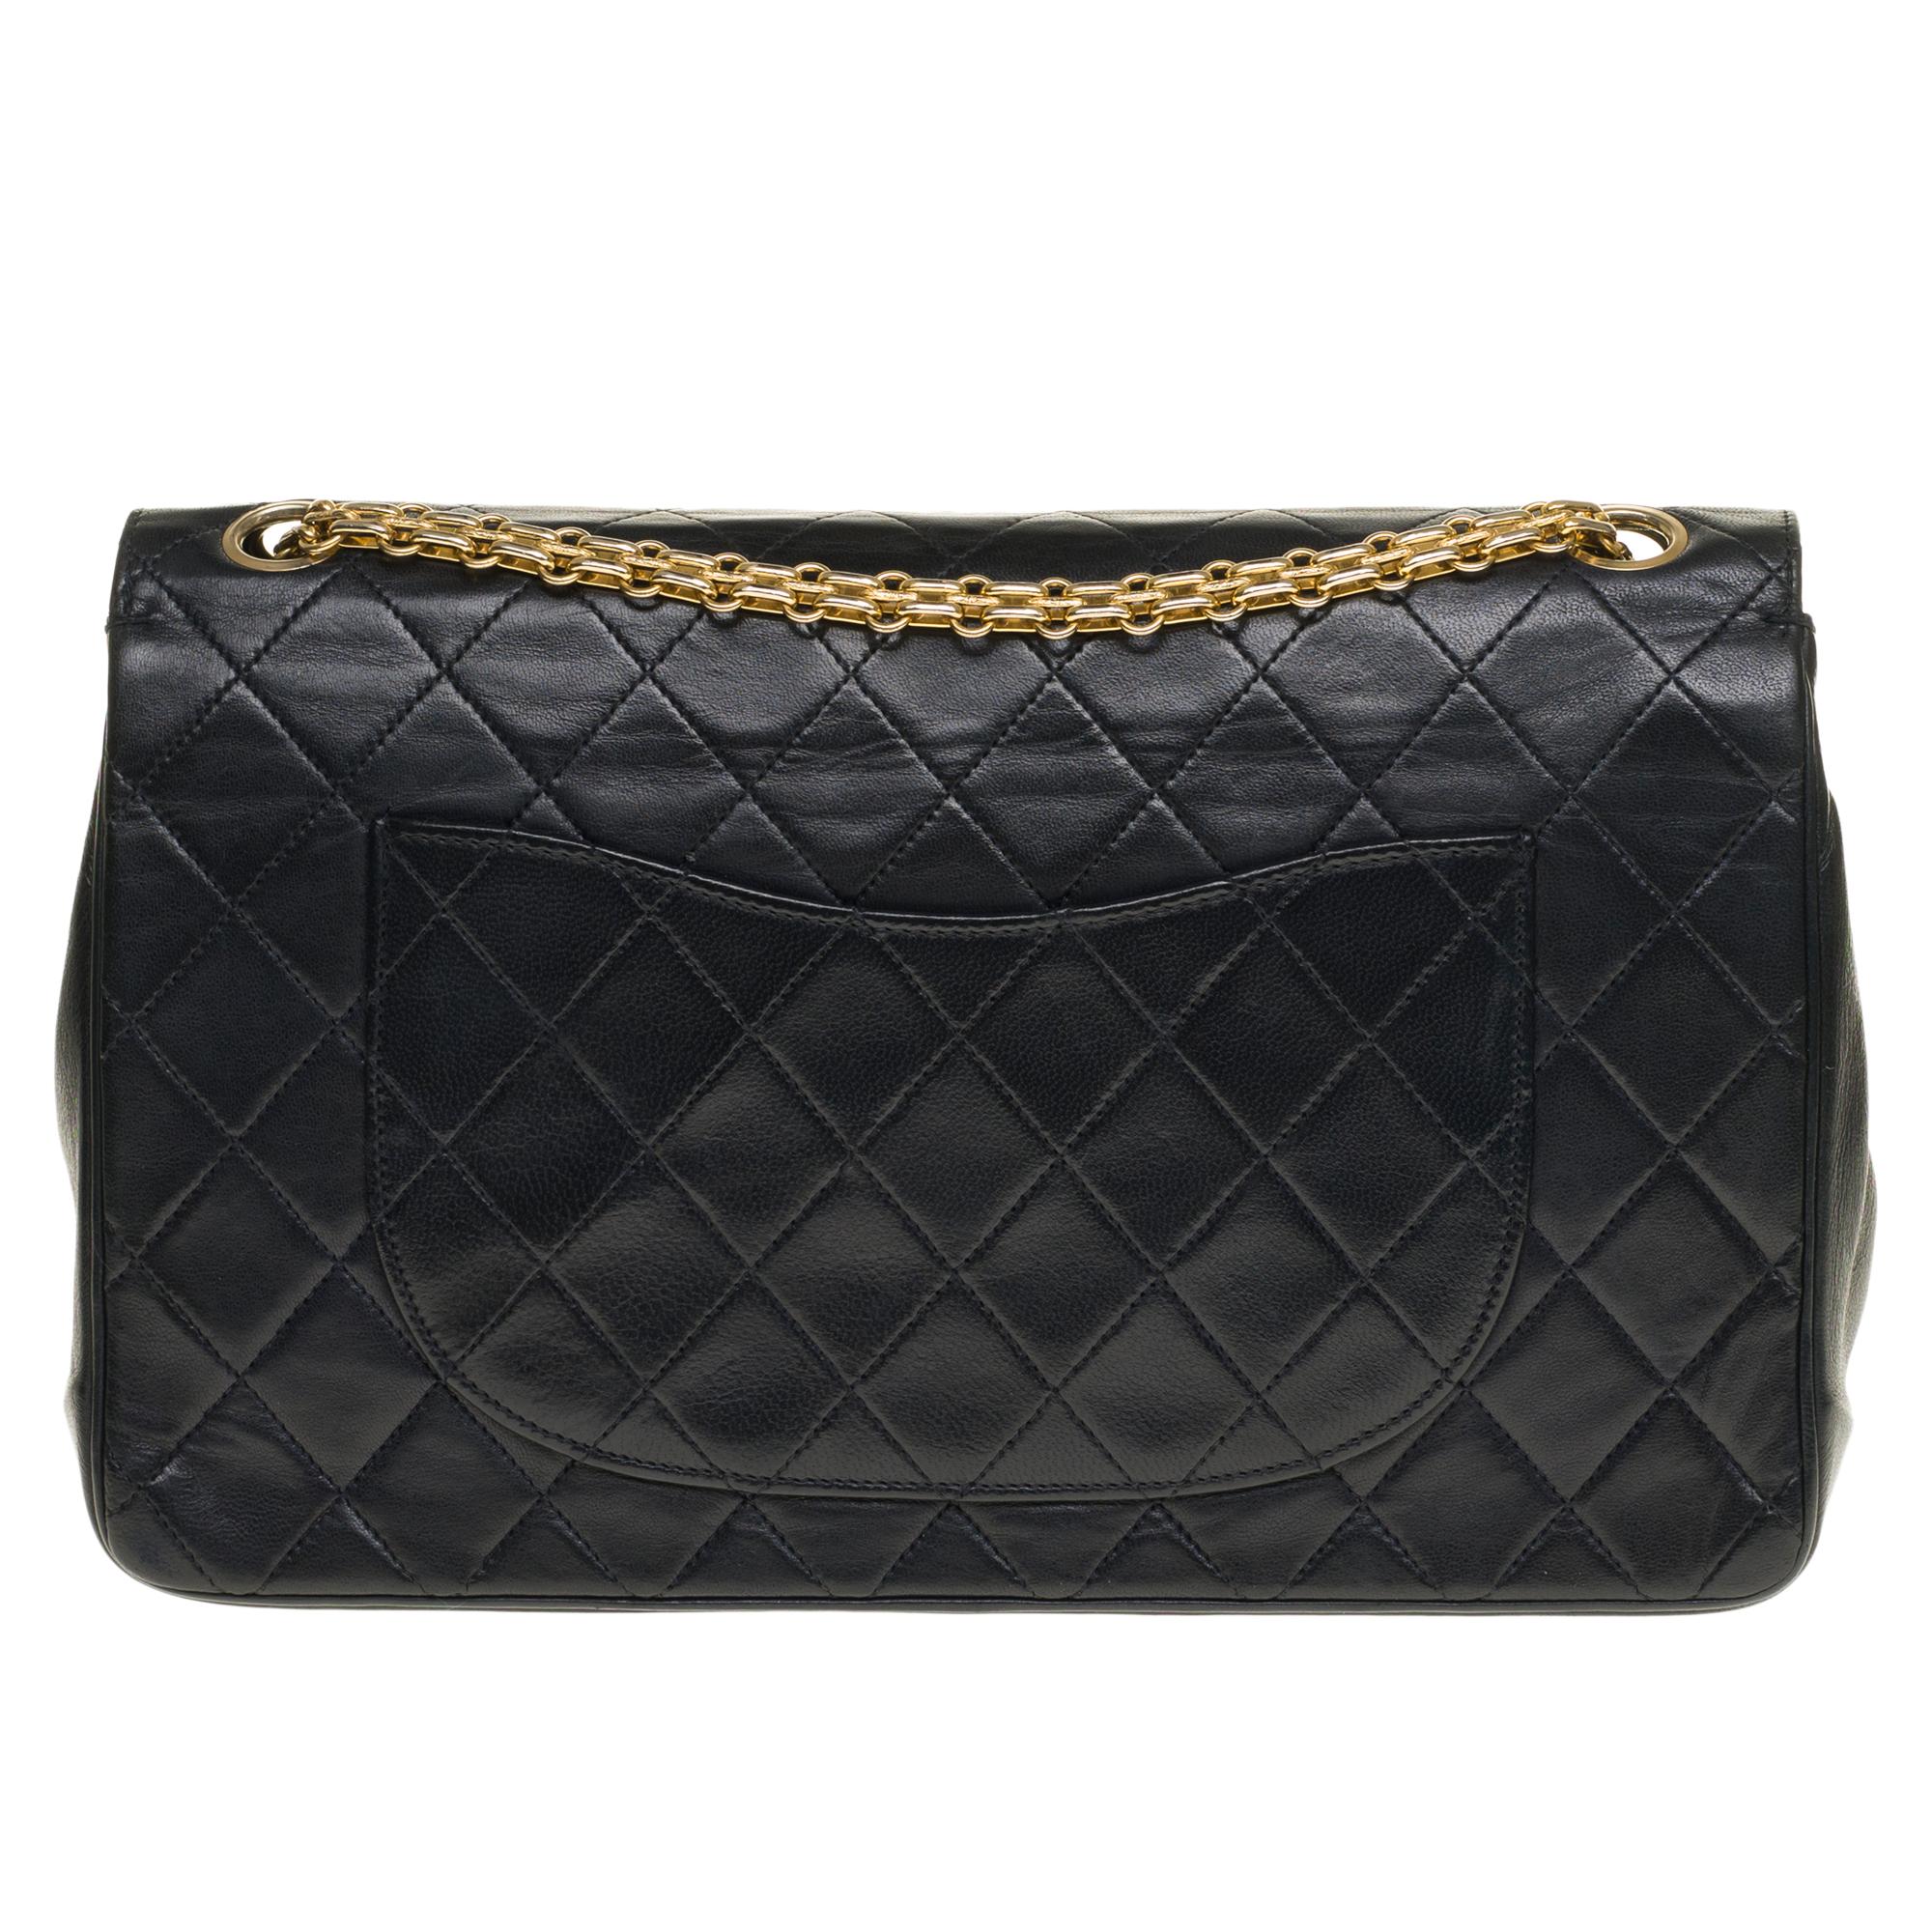 Beautiful Chanel Timeless Handbag 27cm with double flap in black quilted lambskin leather, gold metal trim, a Mademoiselle chain handle in gold metal allowing a hand or shoulder support.

Closure with gold metal flap.
A patch pocket on the back of